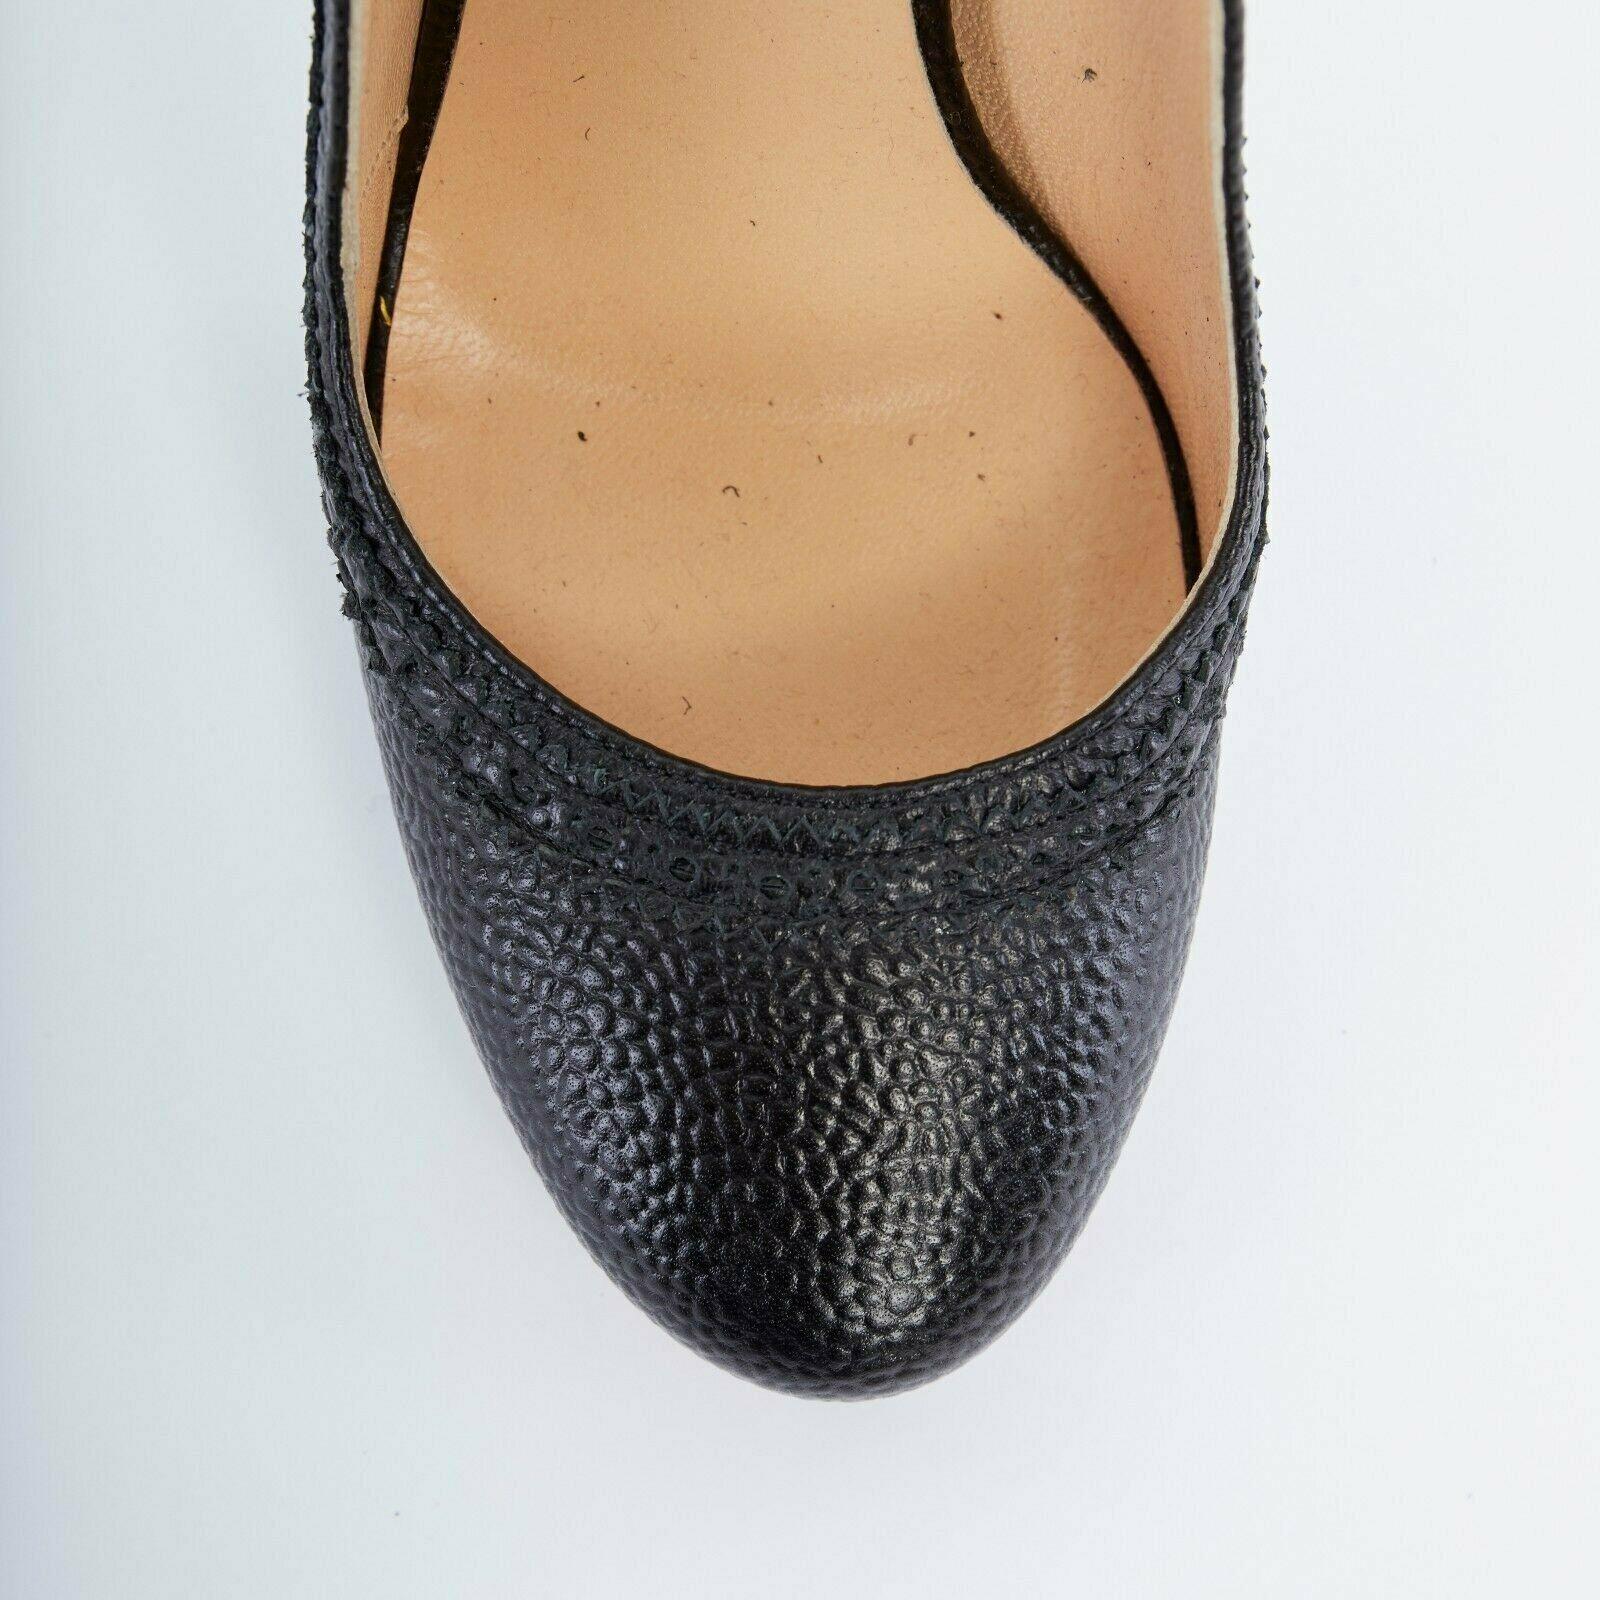 THOM BROWNE black grained leather brogue inspired round toe heel EU37.5 US7.5 For Sale 2